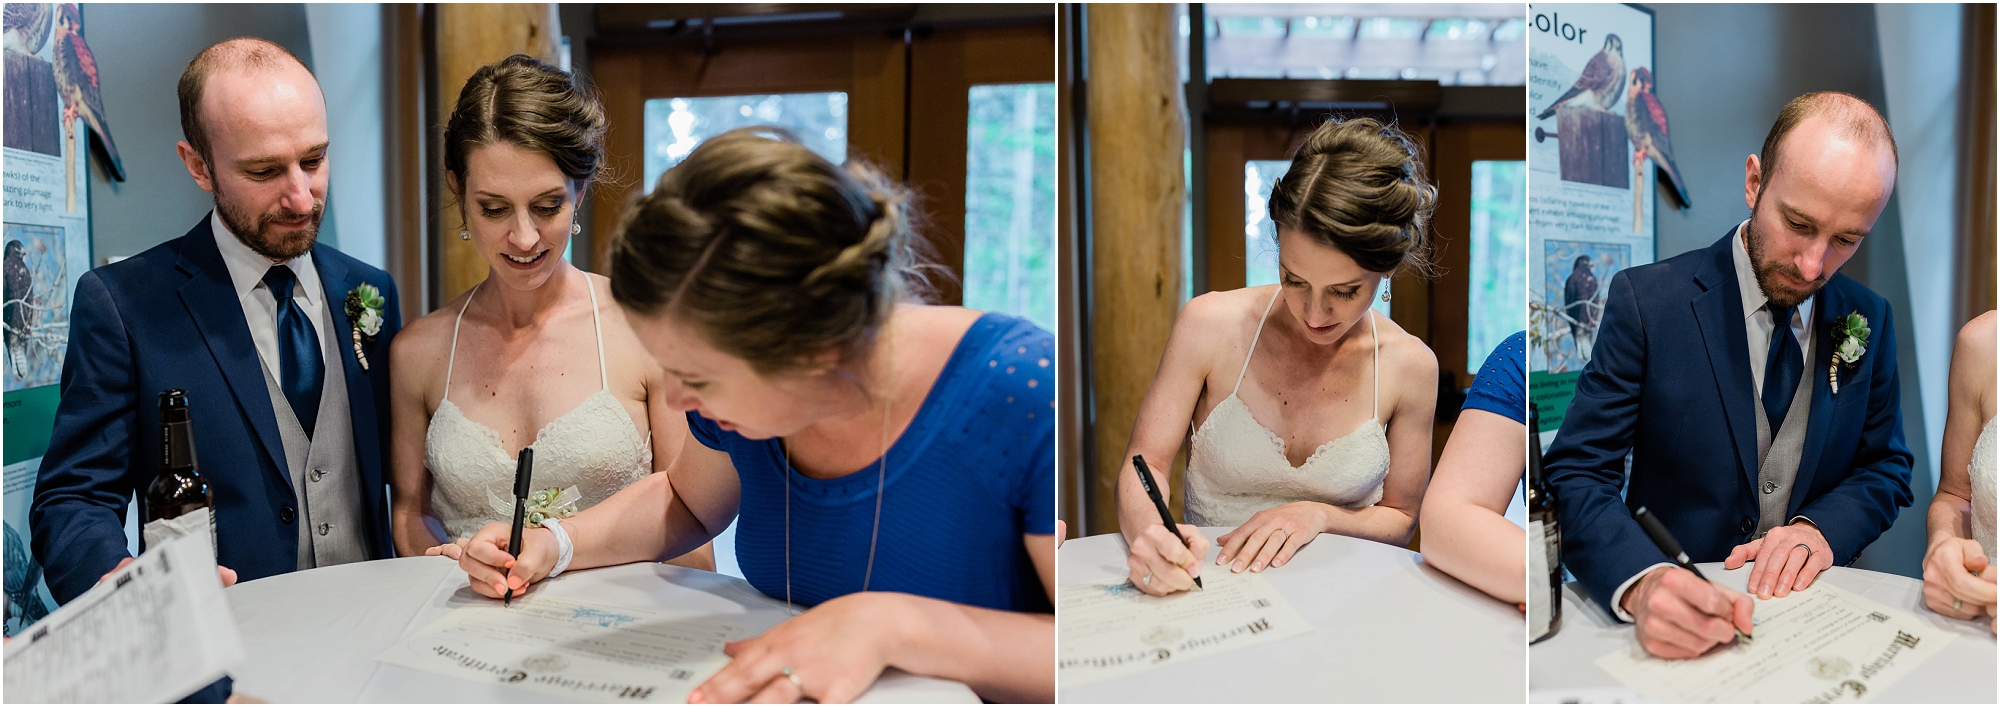 The wedding couple signs their marriage license and makes it official at their Oregon museum wedding in Bend. | Erica Swantek Photography